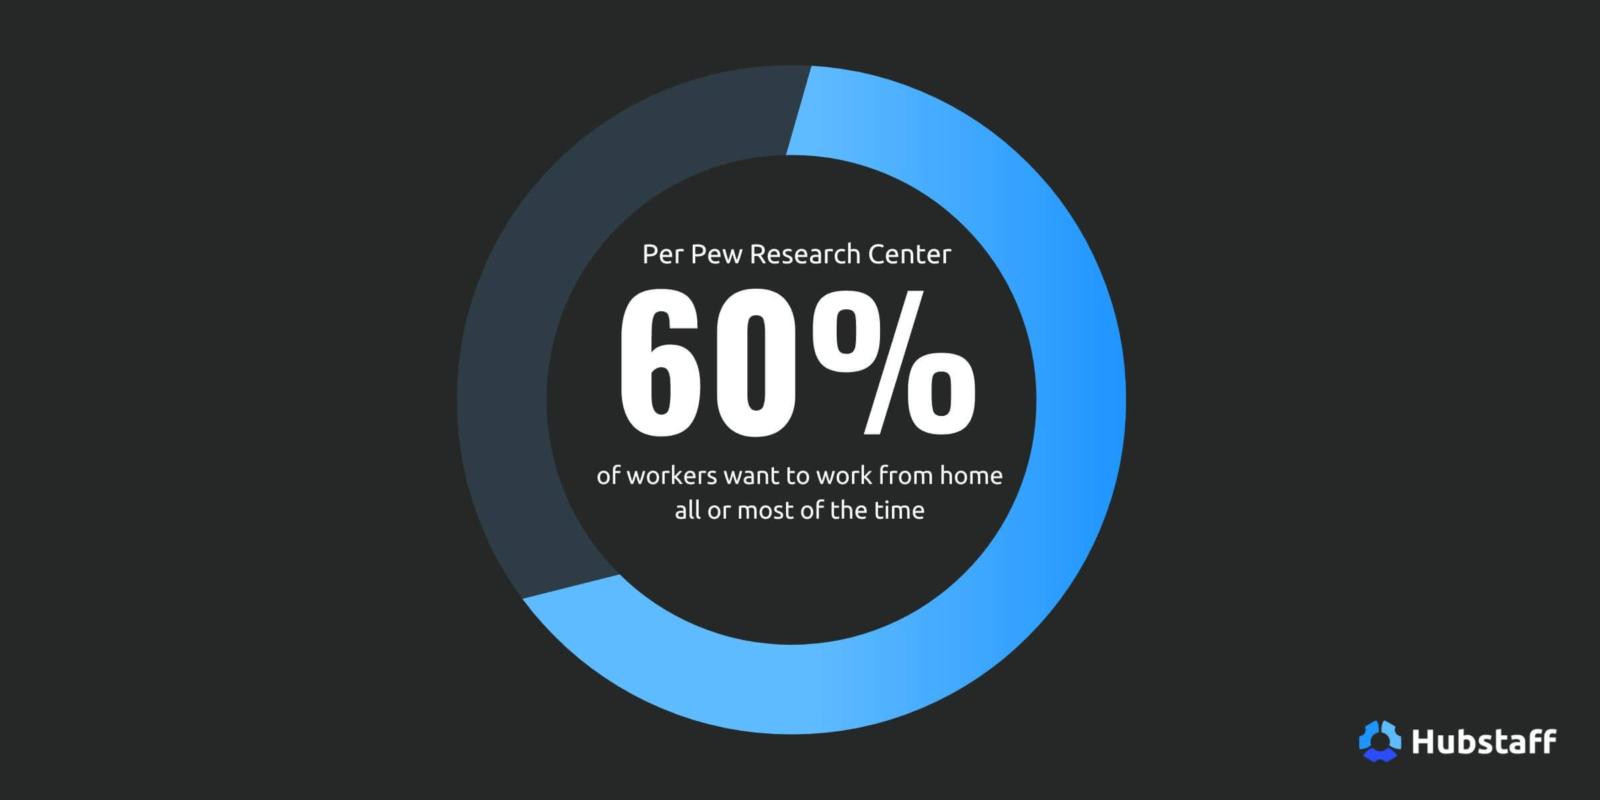 Per Pew Research Center, 60% of workers want to work from home all or most of the time.